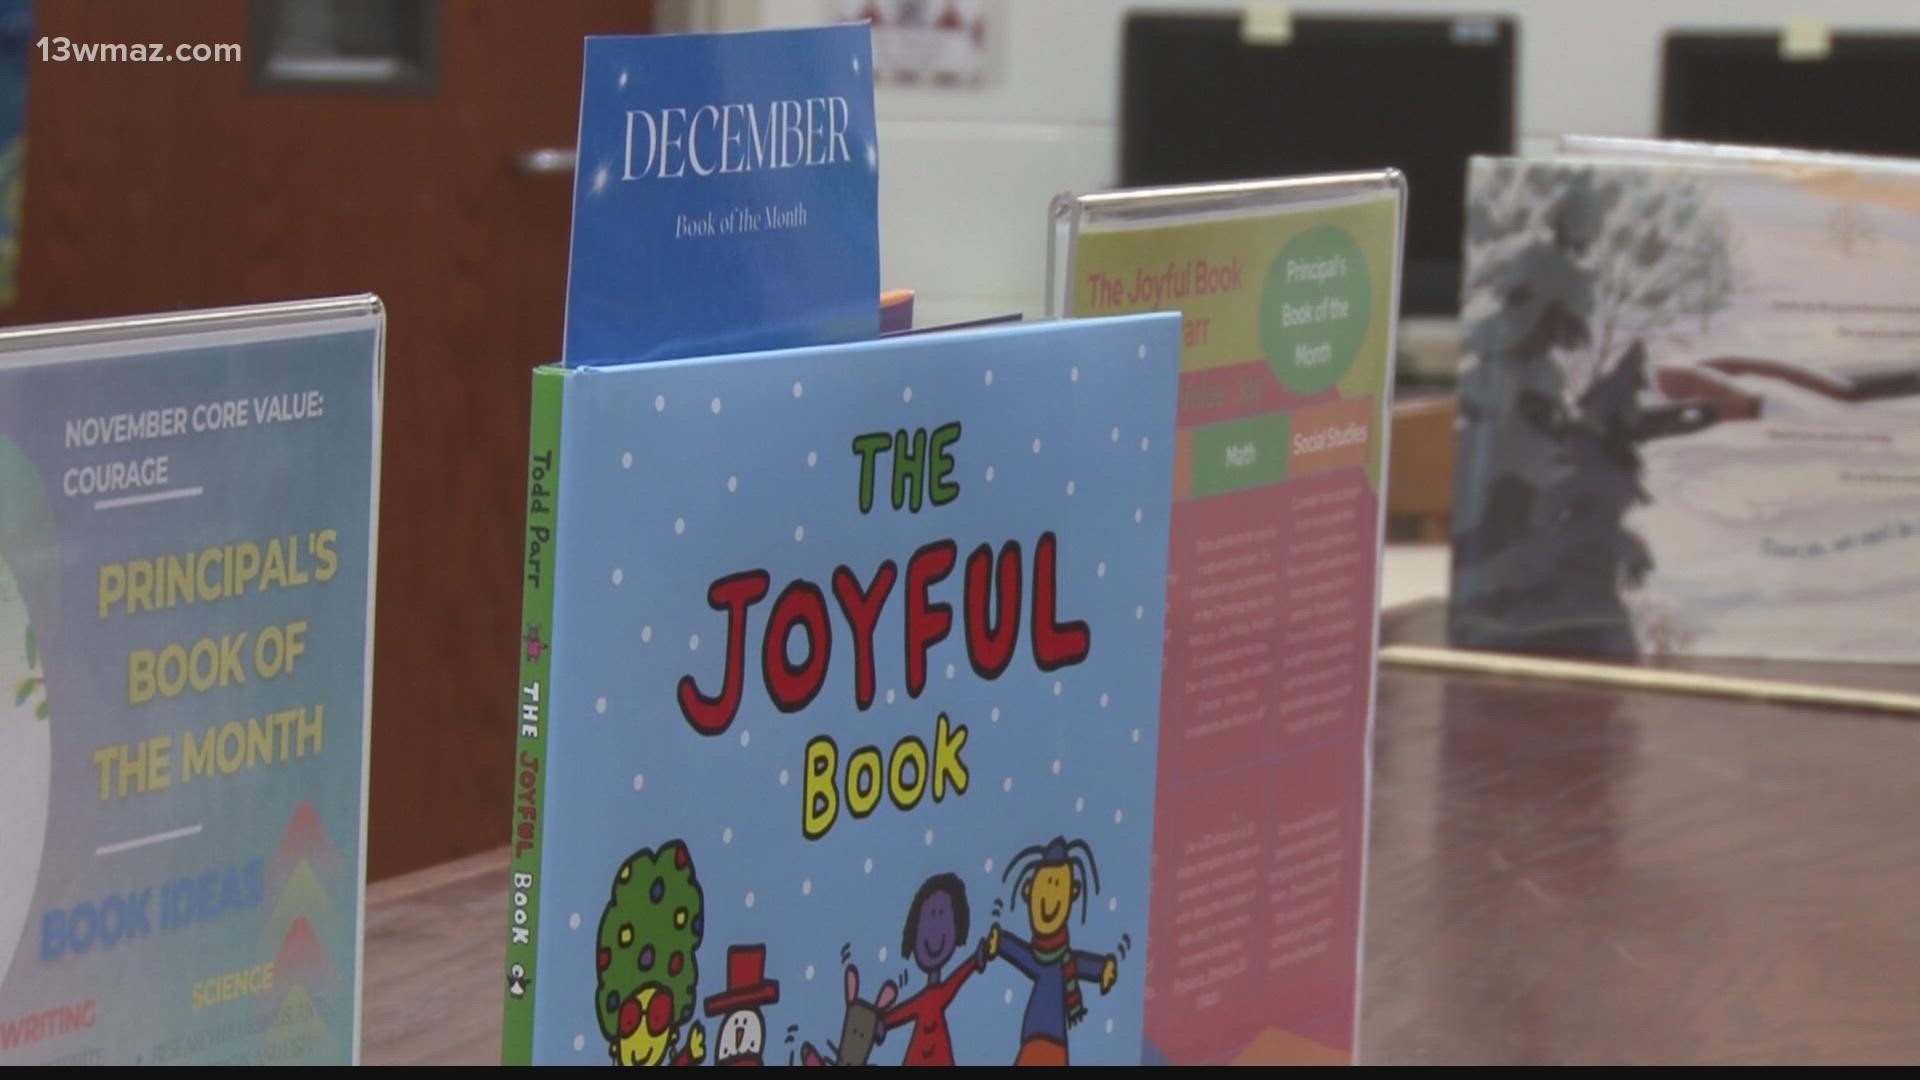 So far, students have read books like "The Magical Yet",  "Mel Fell", and "The Joyful Book."